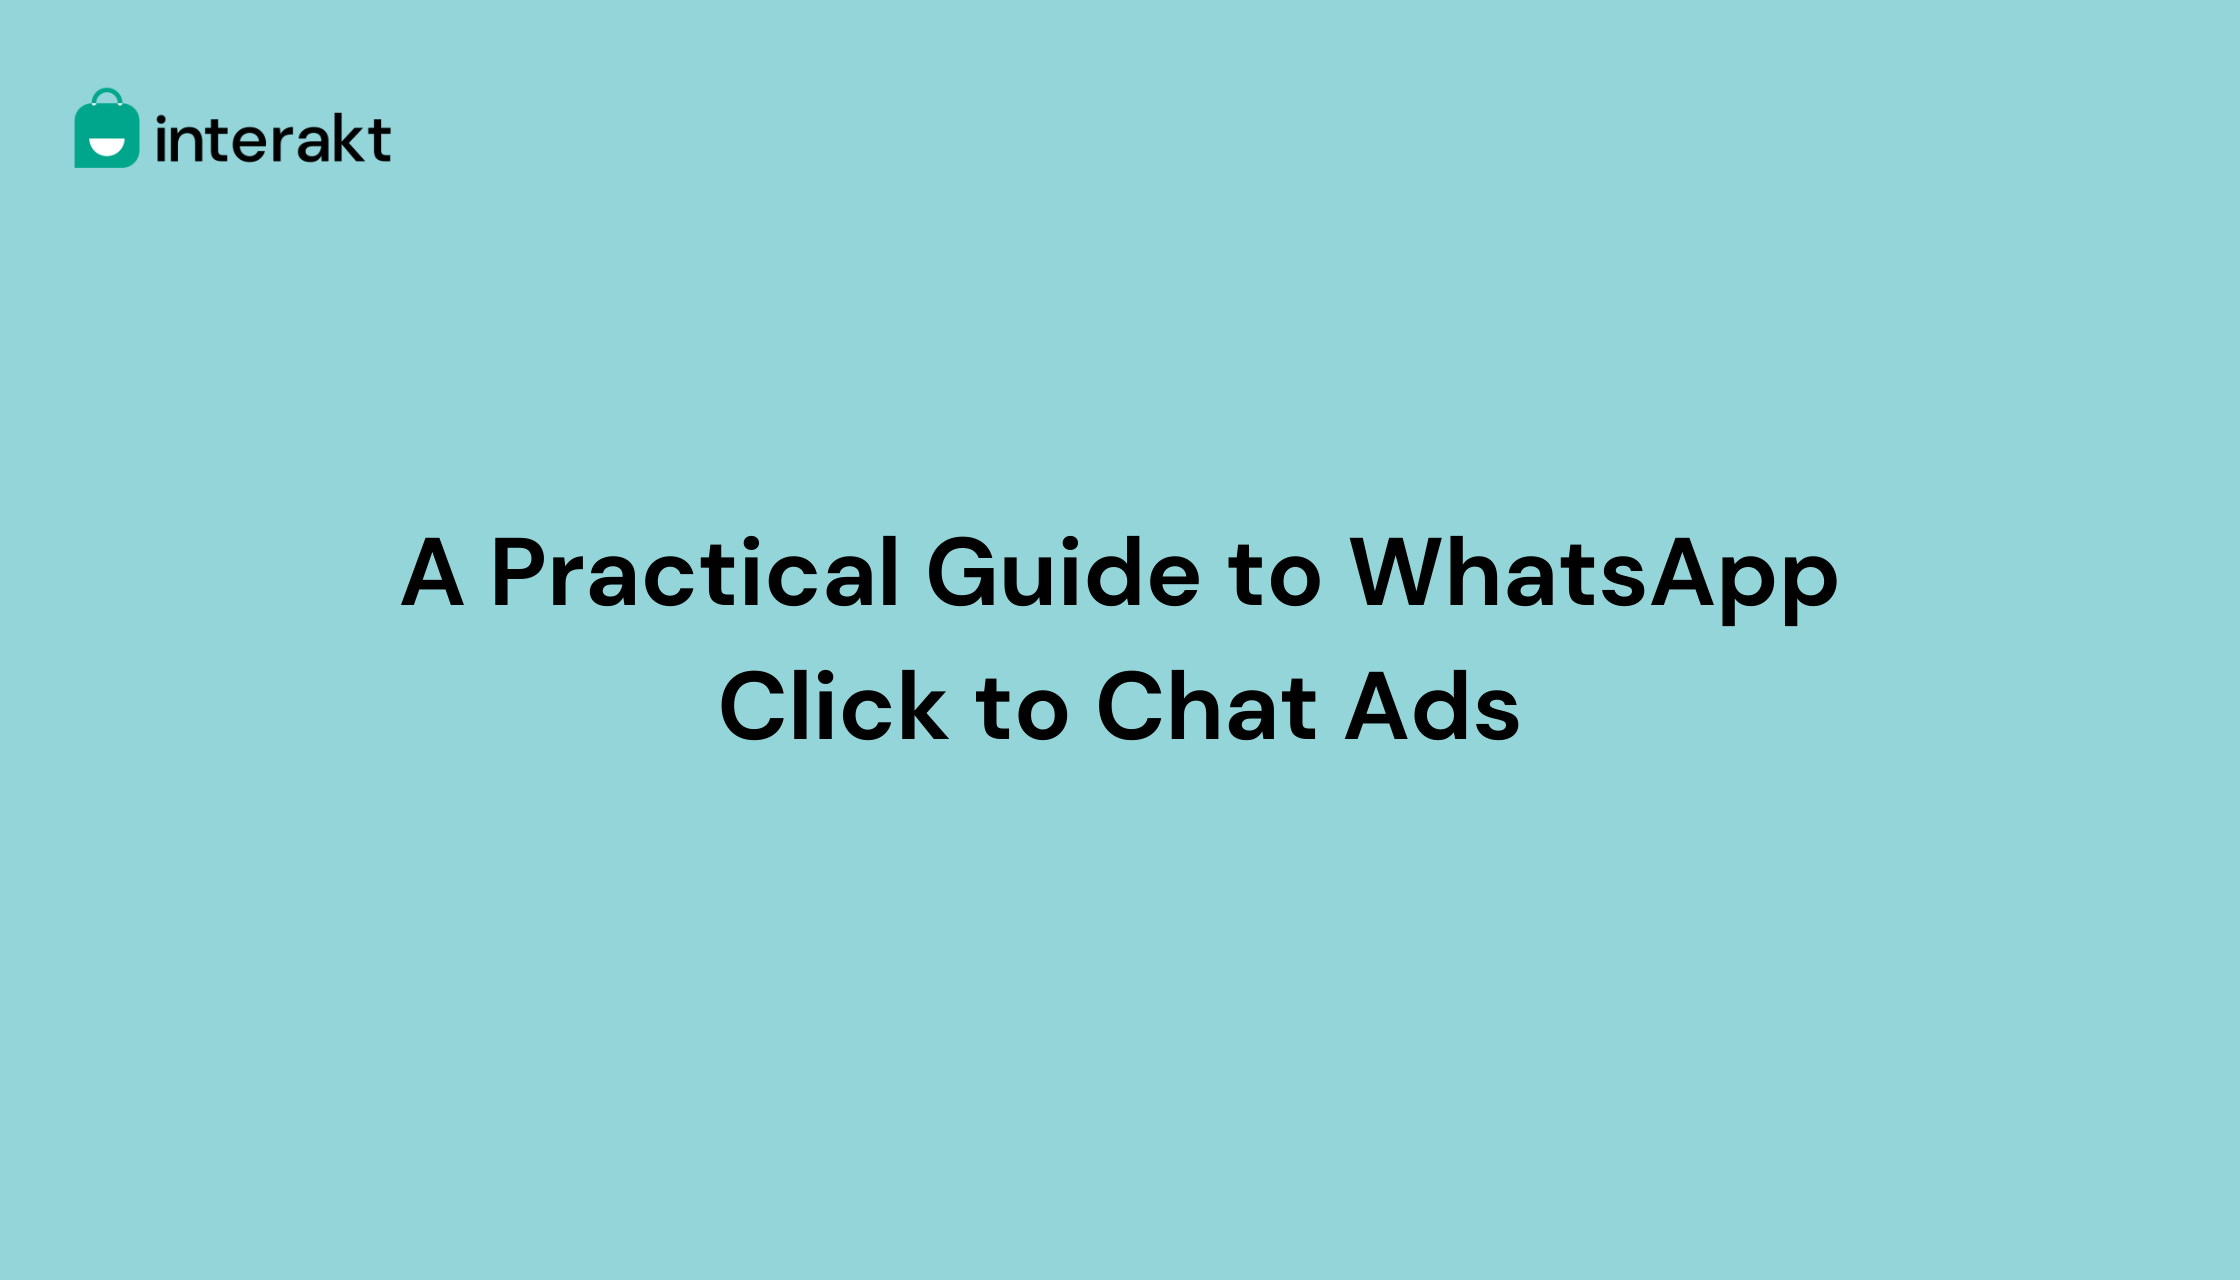 A Practical Guide to WhatsApp Click to Chat Ads